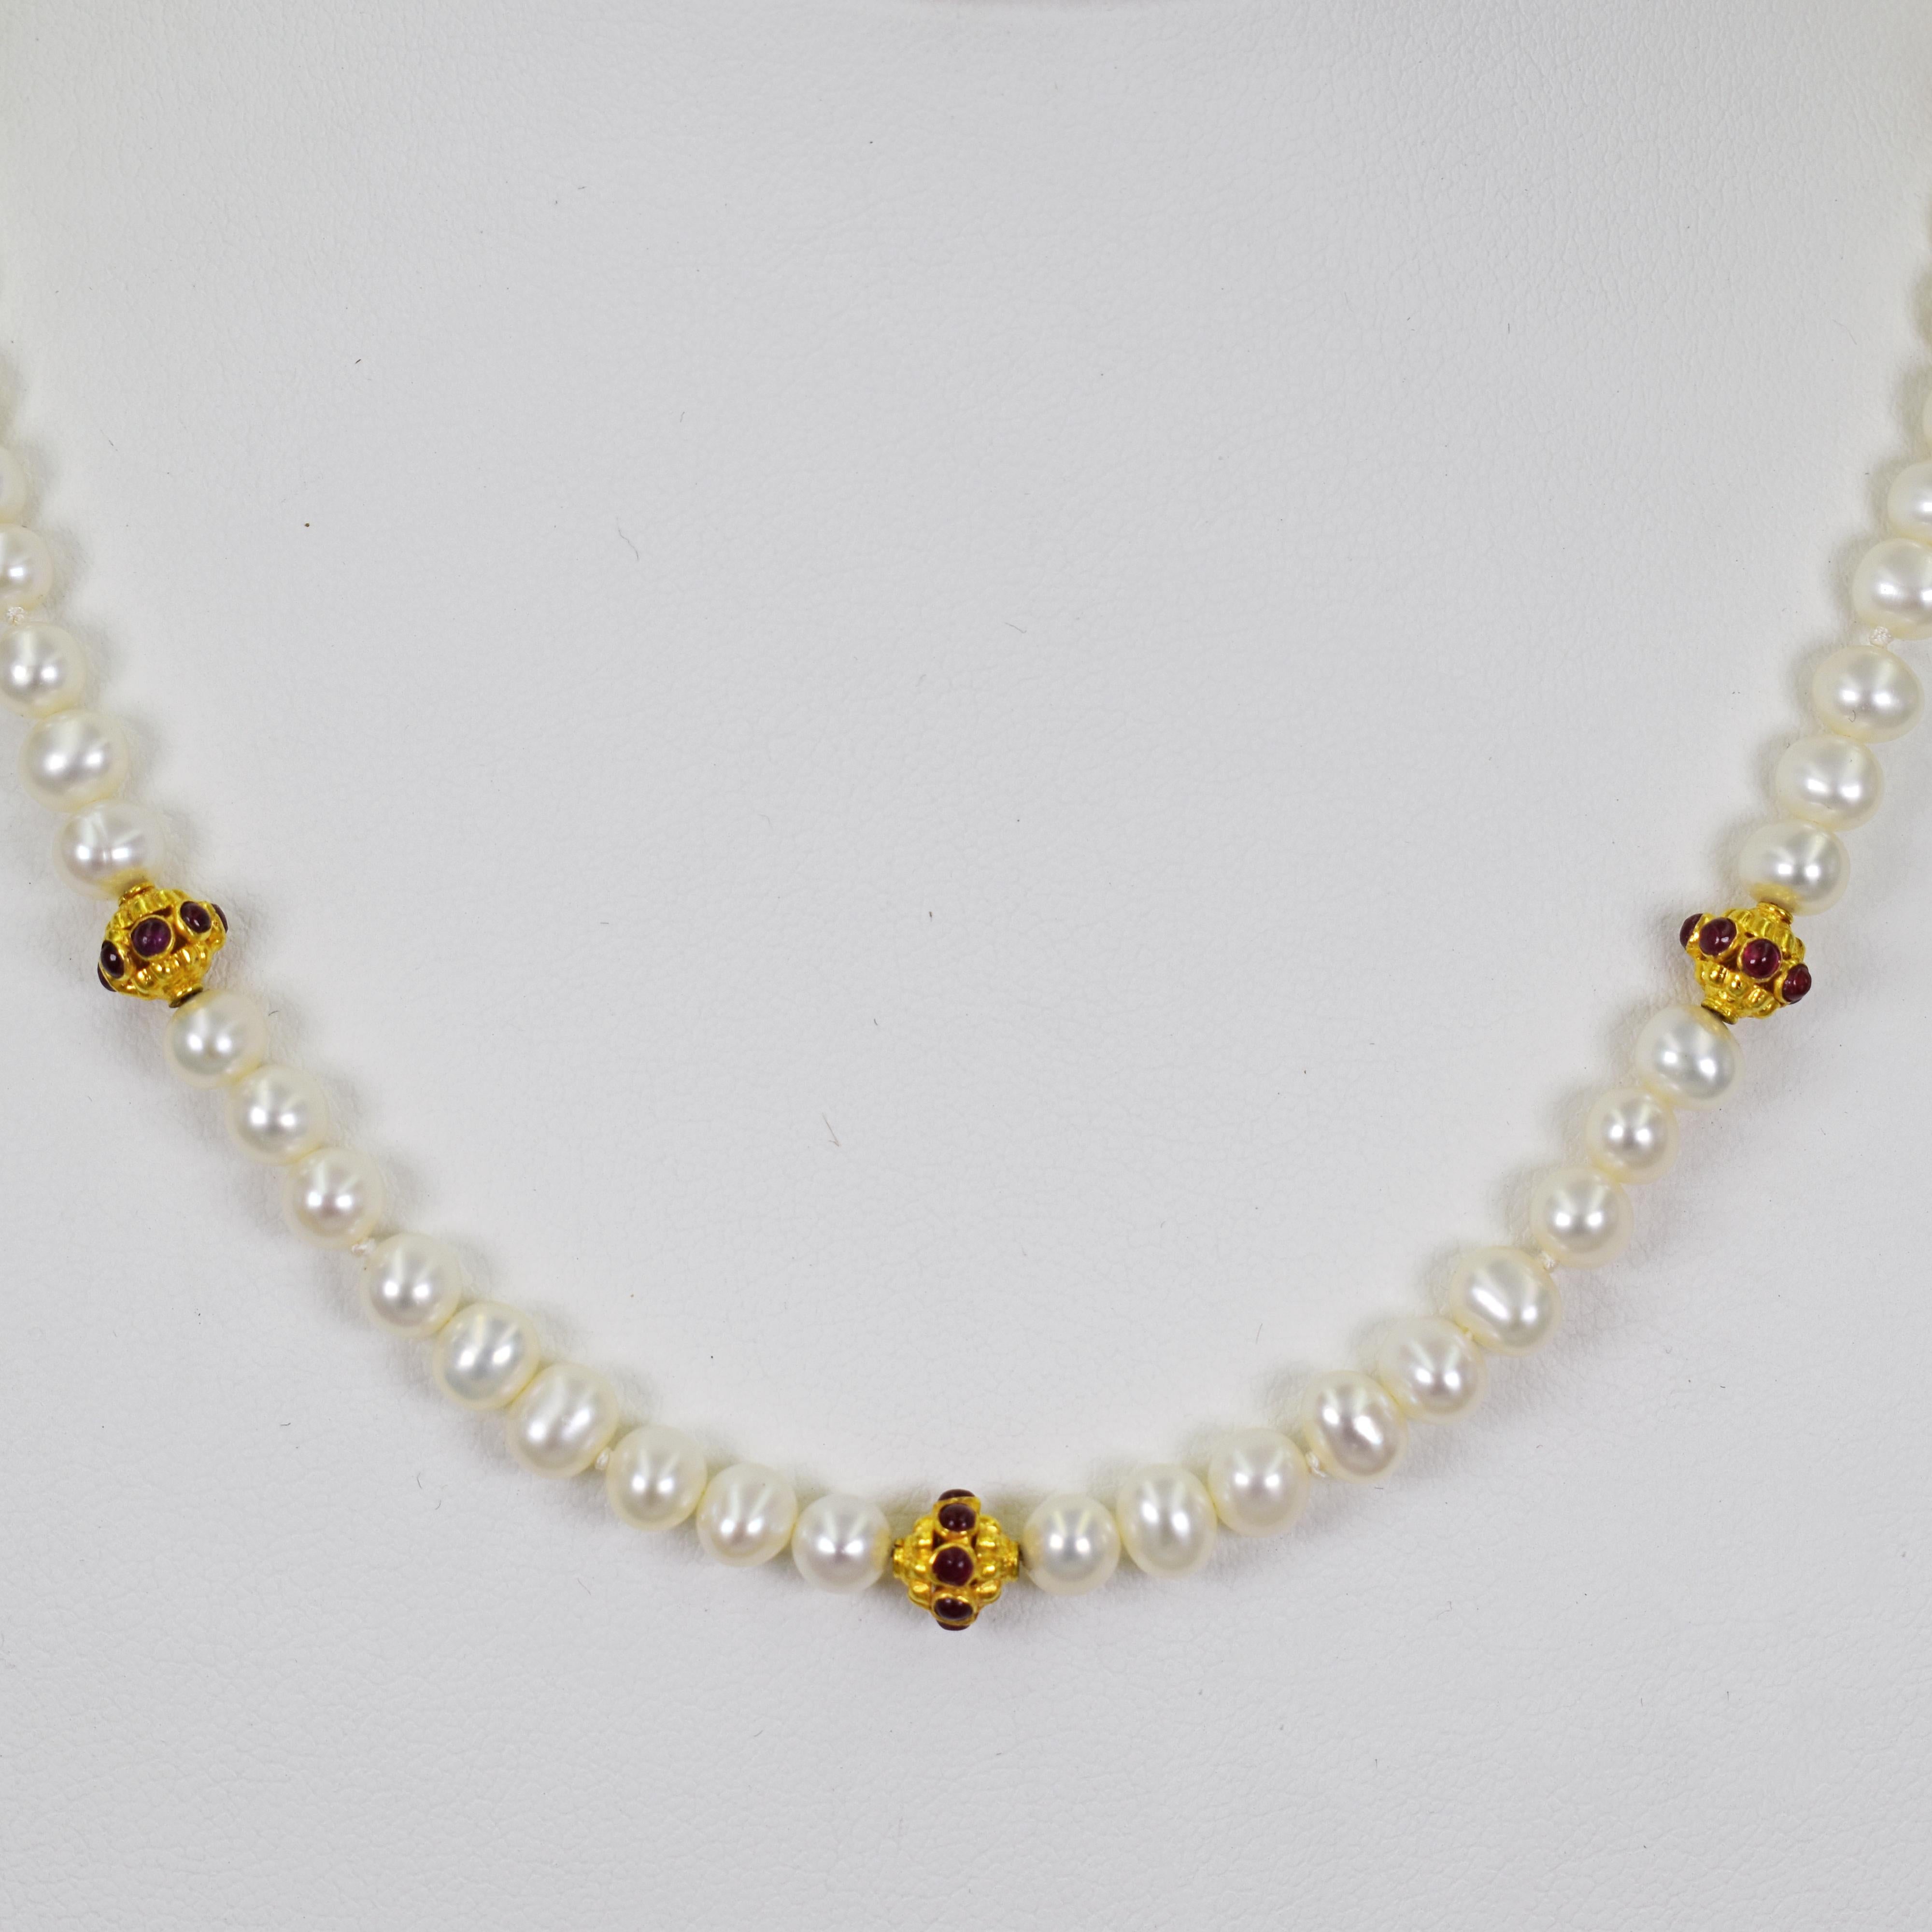 22k gold beads necklace